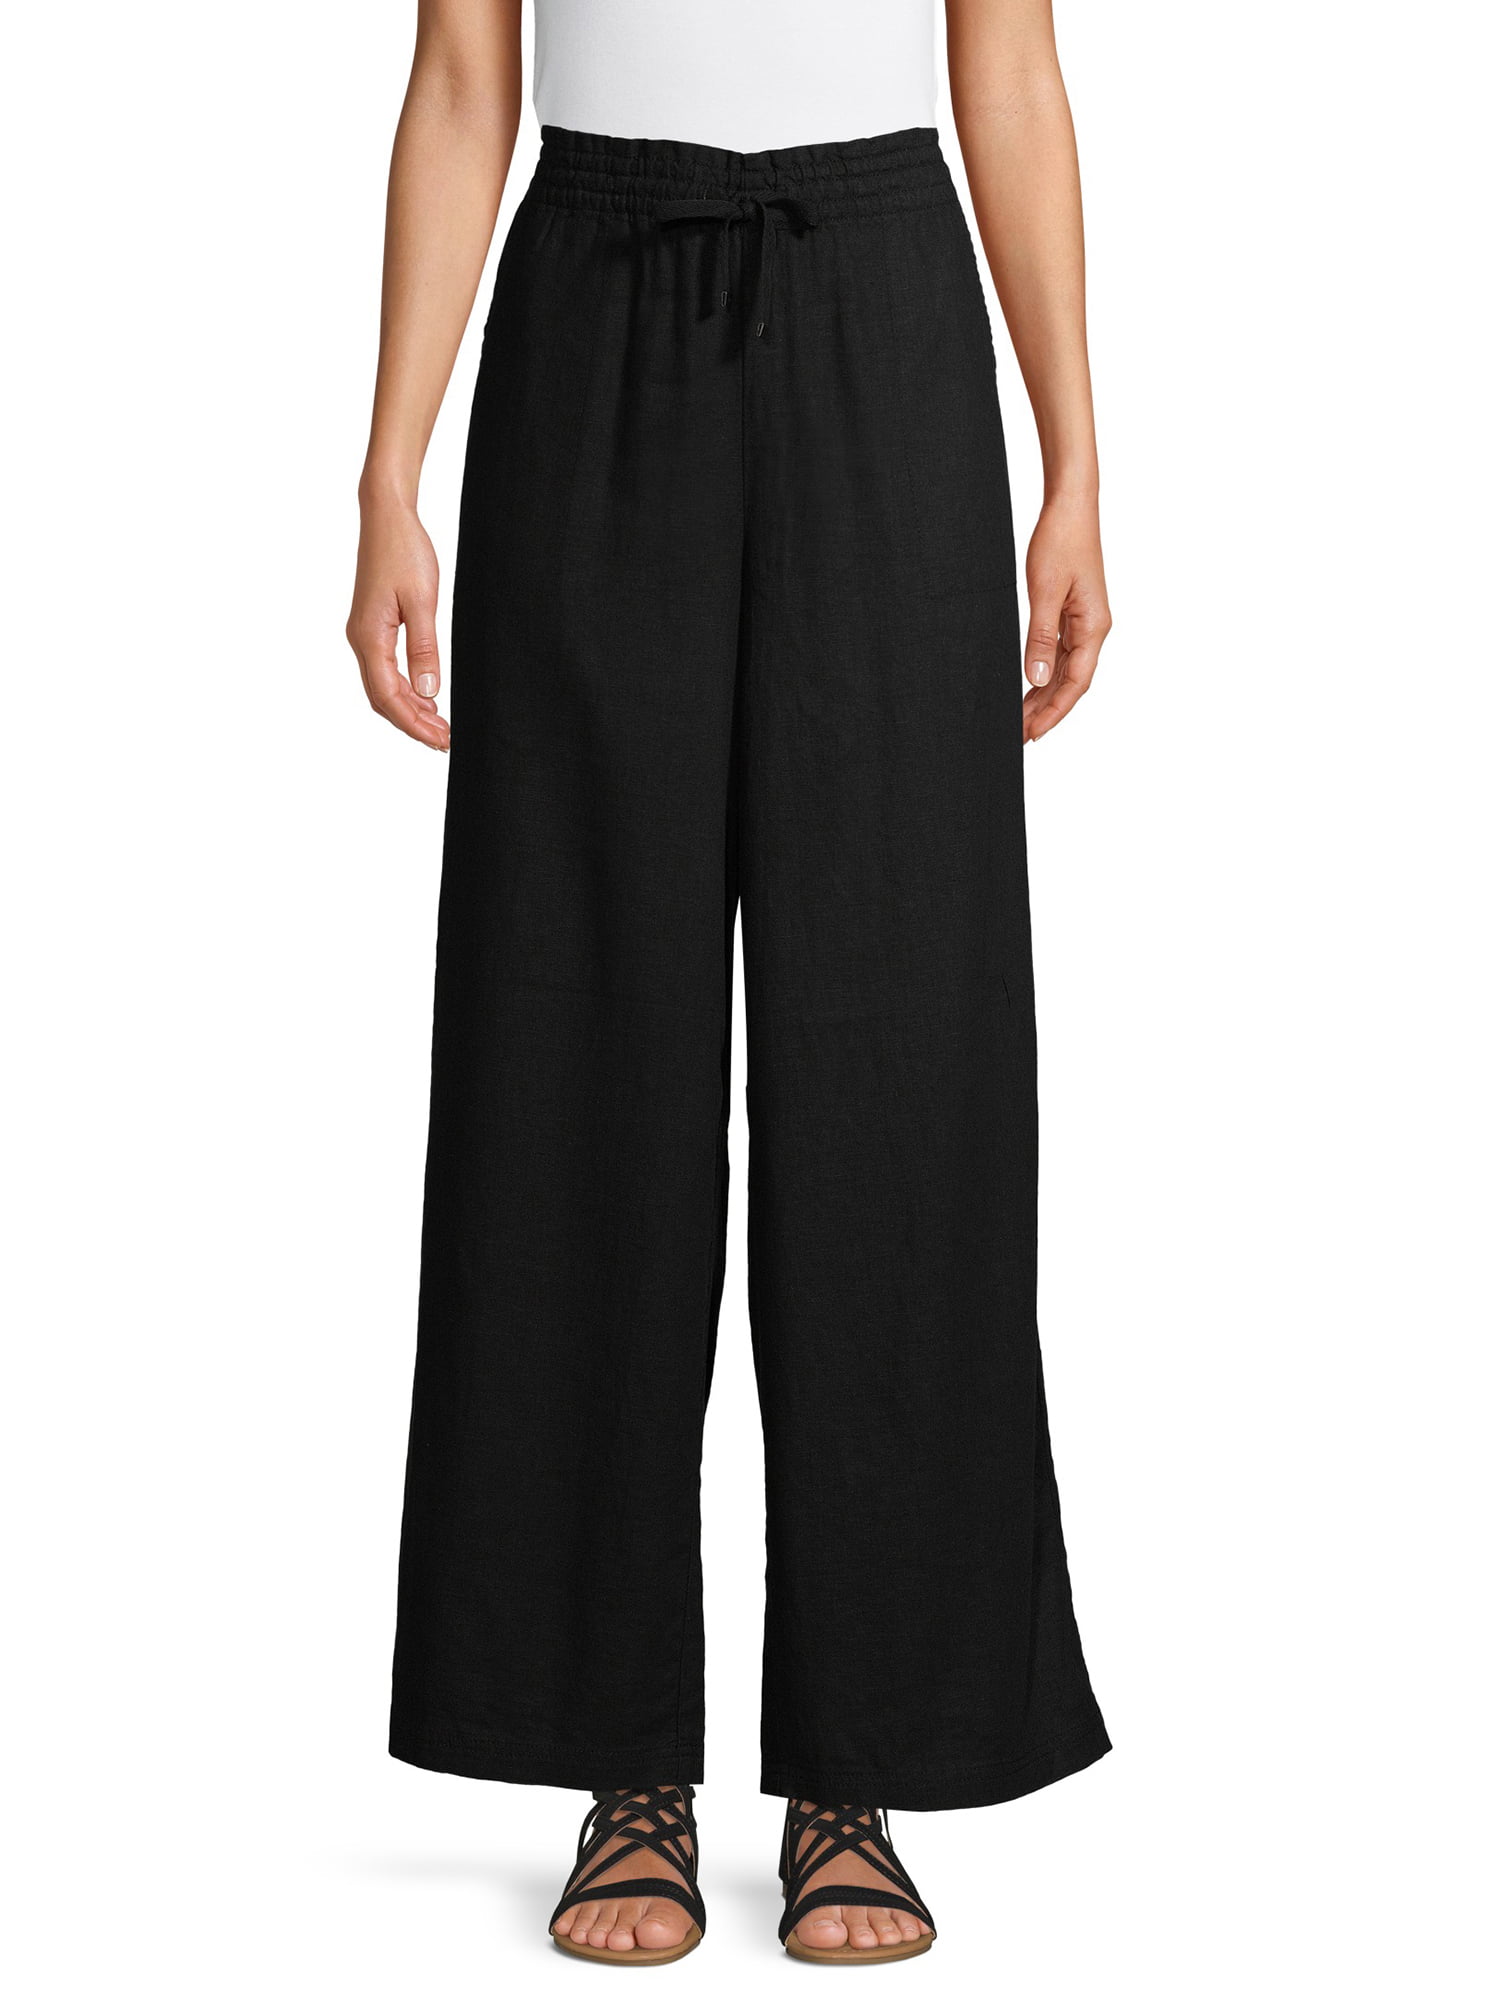  Tall Linen Pants for Women Black Linen Pants Women Women Spring  Pants Womens Hippie Pants Bimini Boot Small Stuff for Five Dollars and  Under one Dollar Items only : Clothing, Shoes